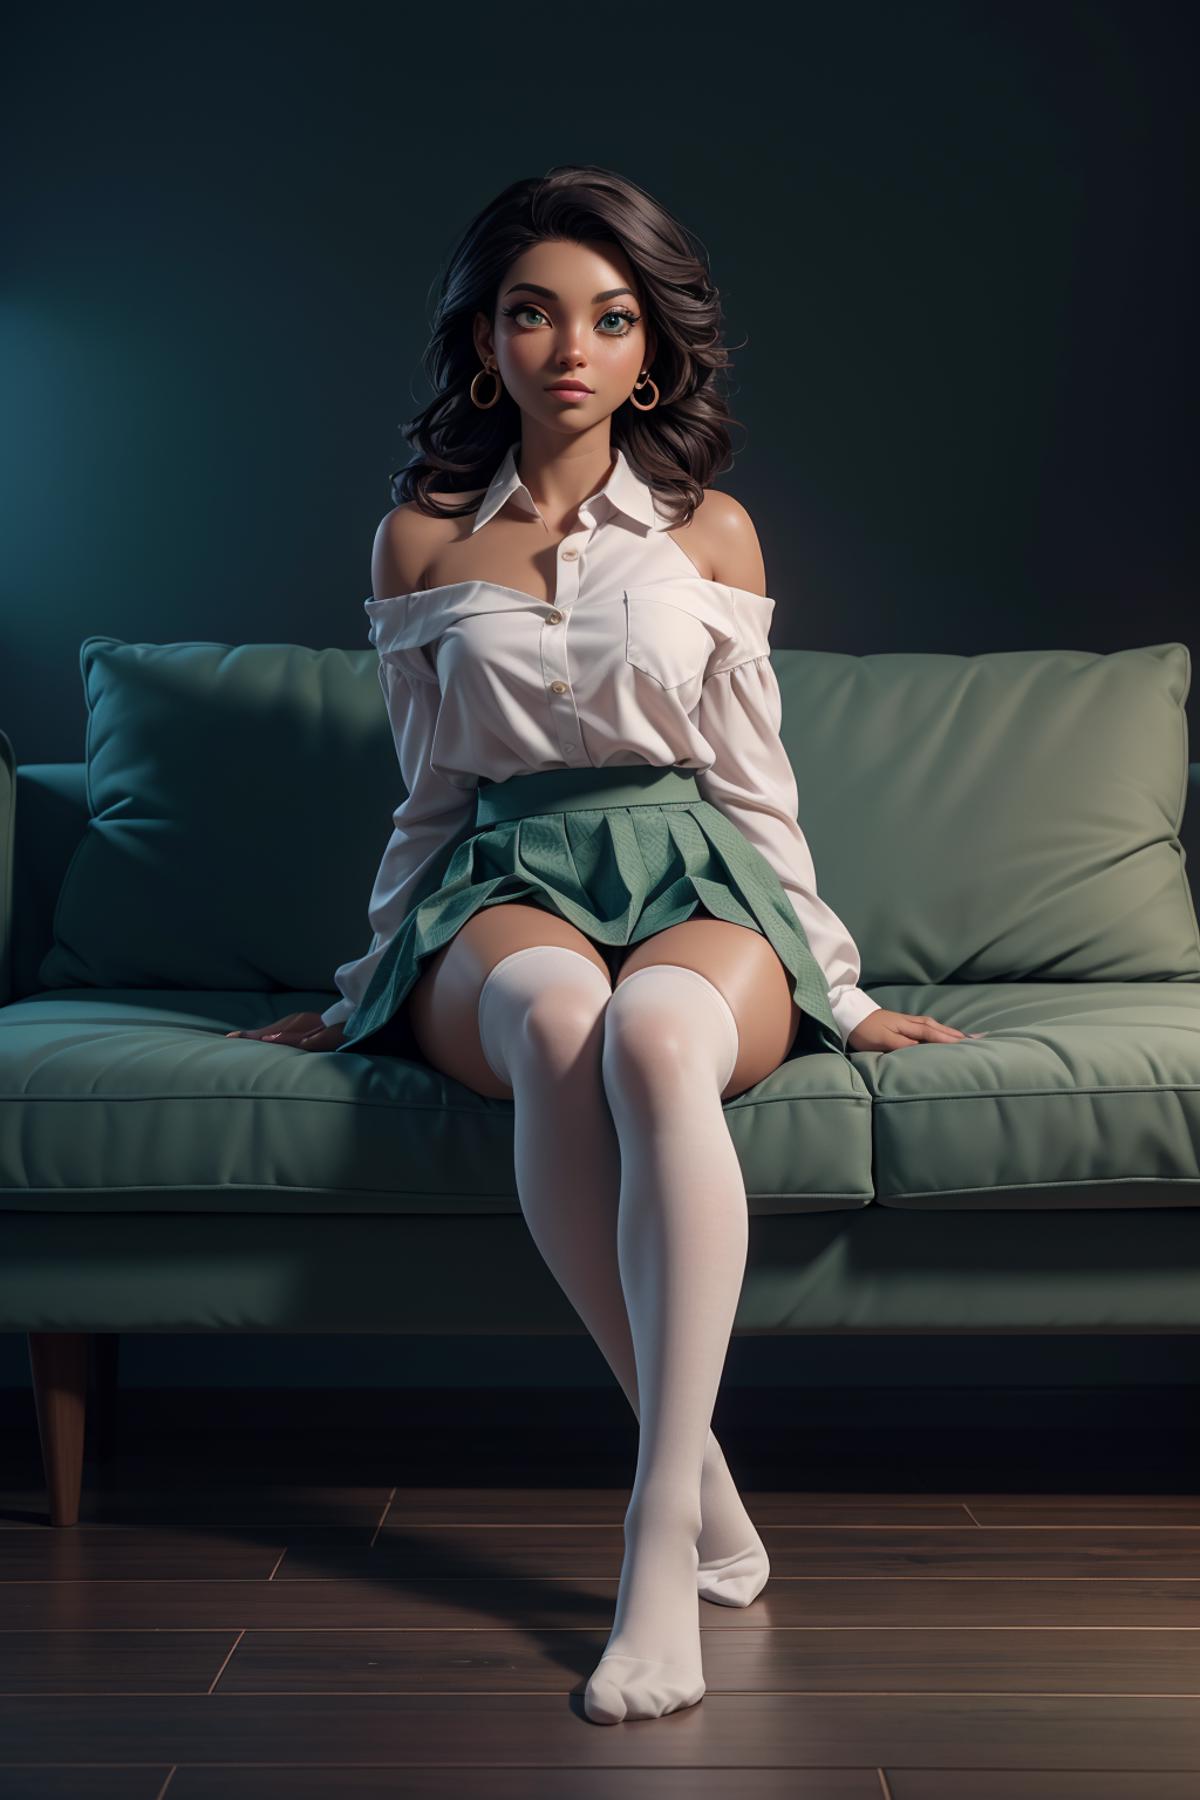 Woman posing on a couch in a white shirt and green skirt.